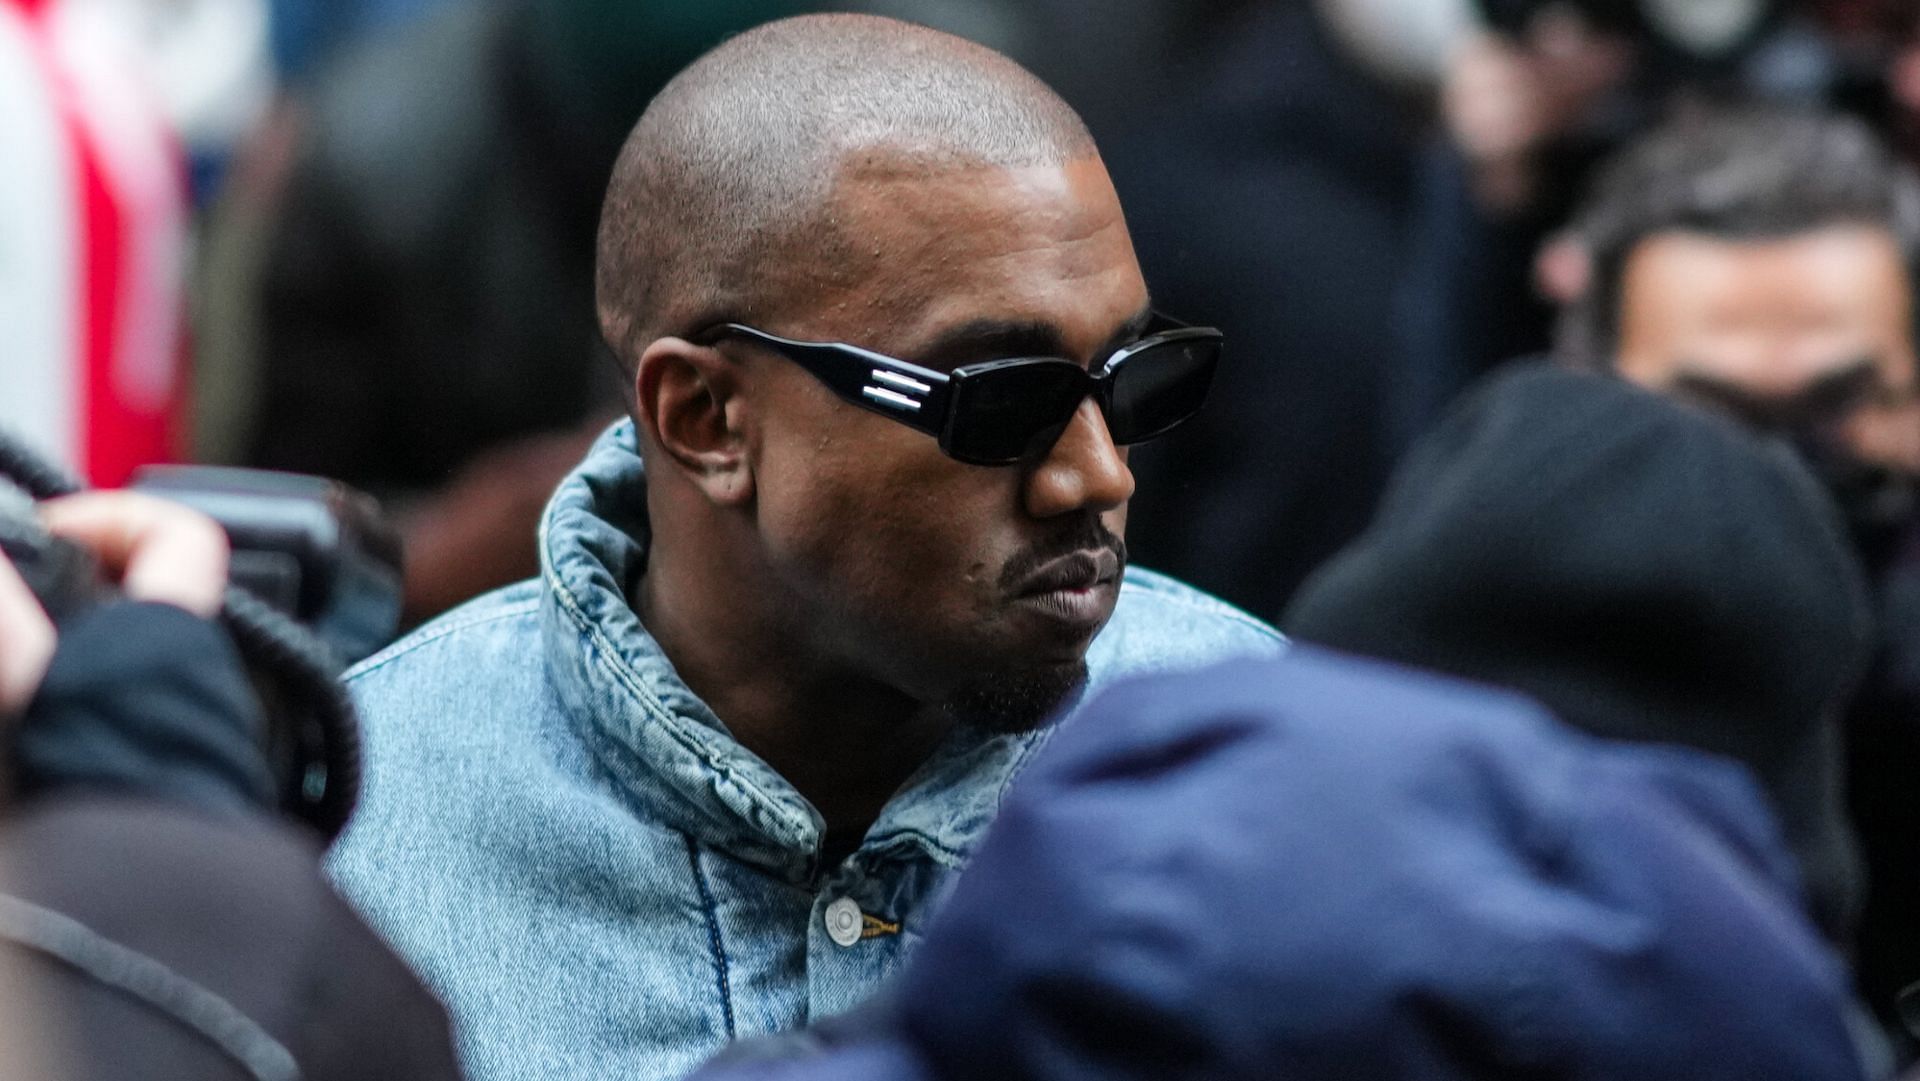 Kanye West also decided to run for the presidential seat in 2020. (Image via Edward Berthelot/Getty)